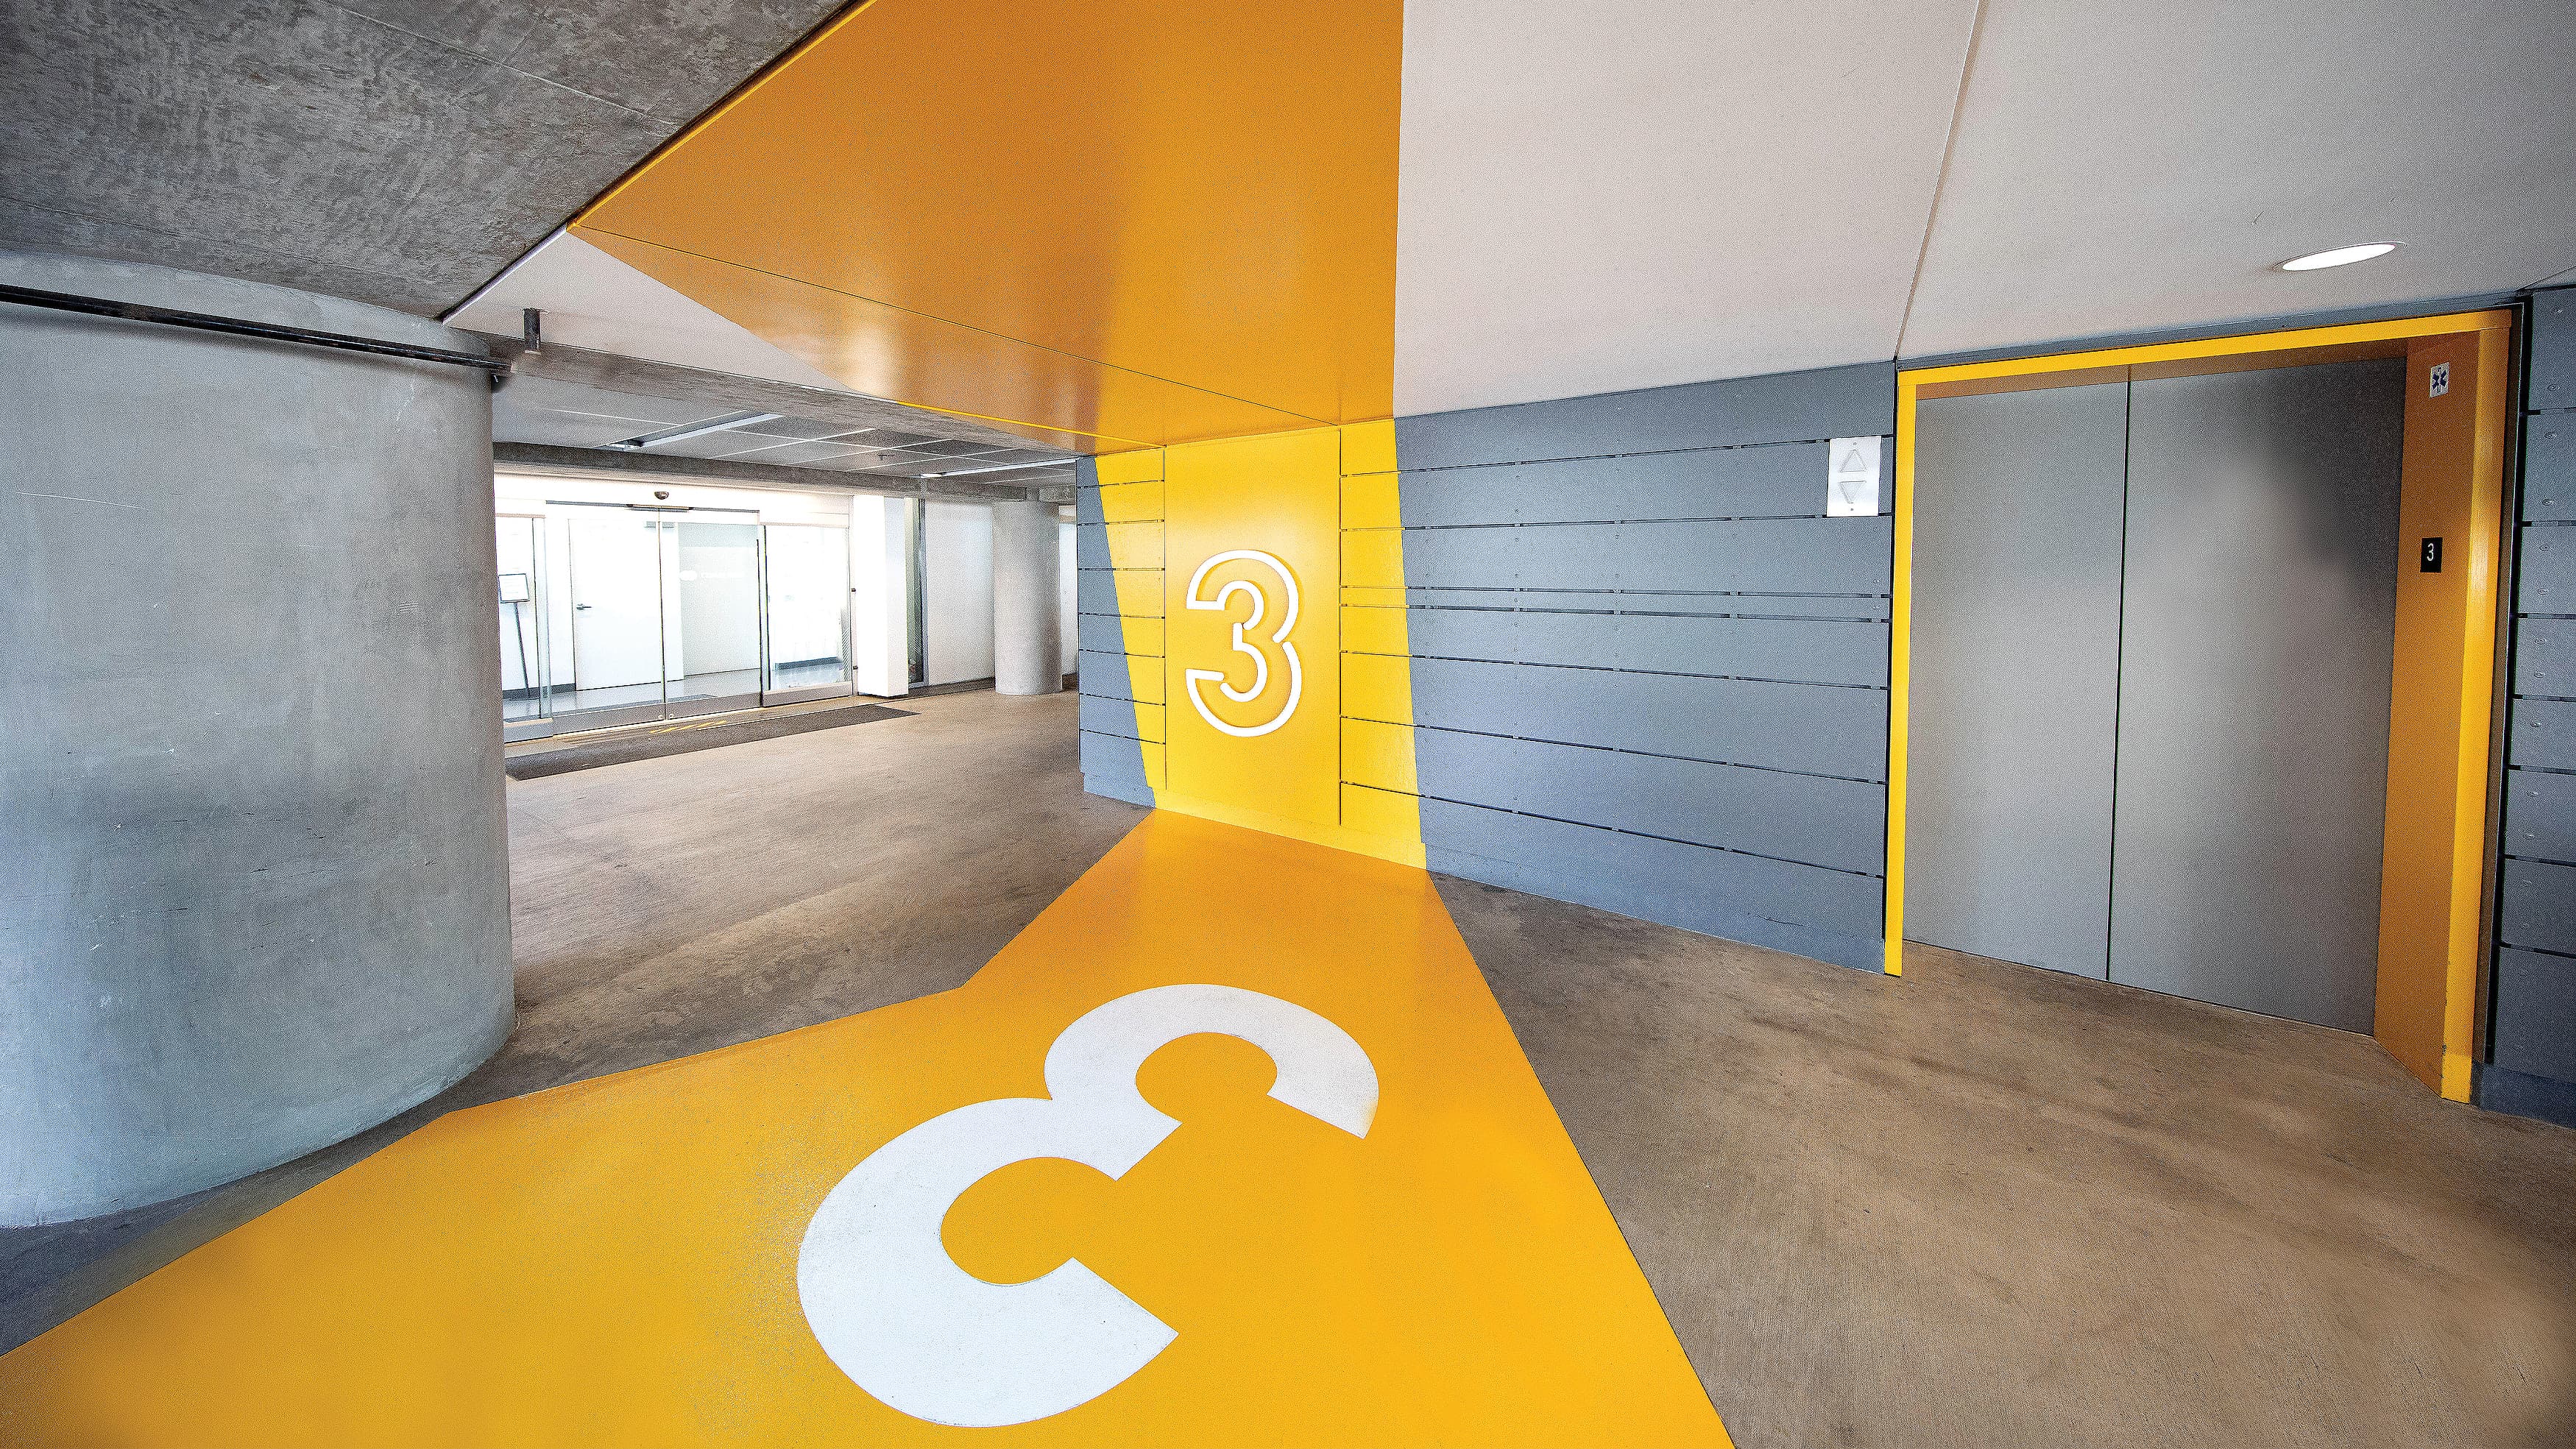 Yellow painted graphic in a parking garage with the floor number 3.